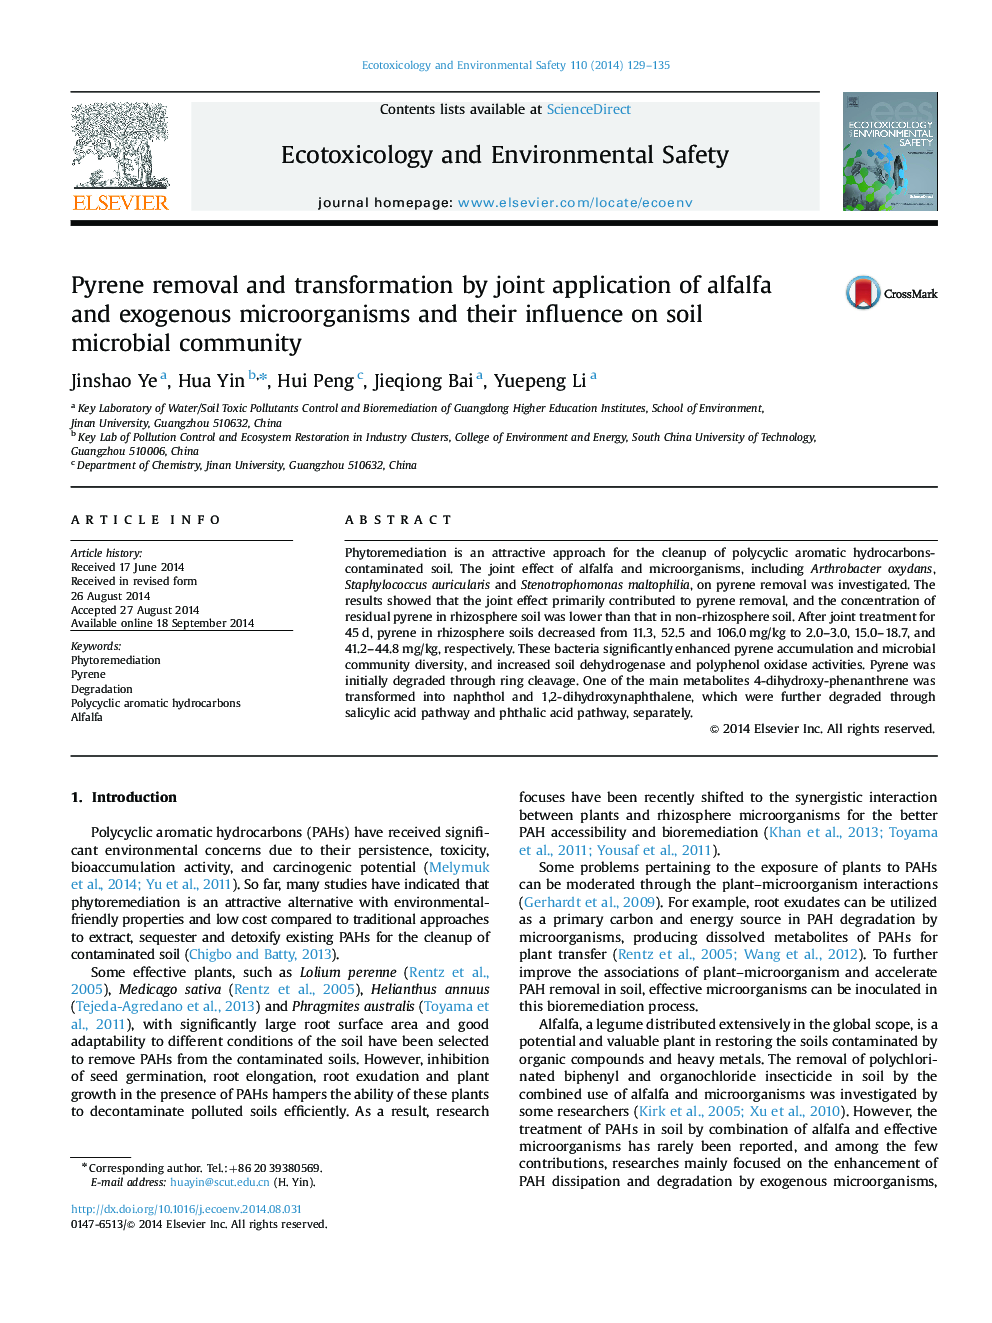 Pyrene removal and transformation by joint application of alfalfa and exogenous microorganisms and their influence on soil microbial community